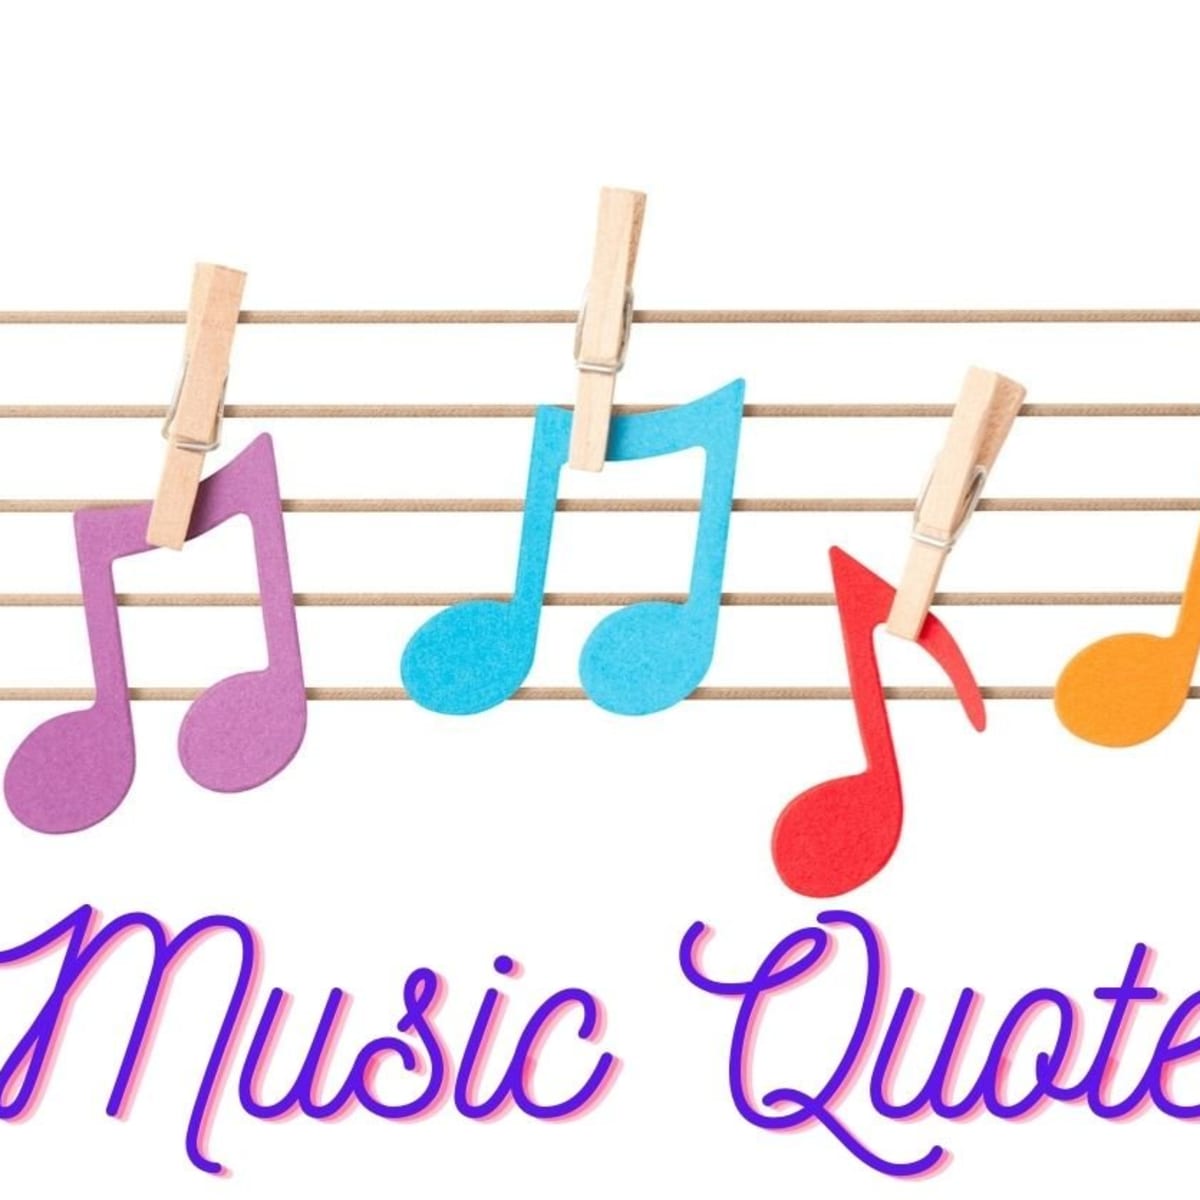 Cool Music Notes And Quotes Wallpapers